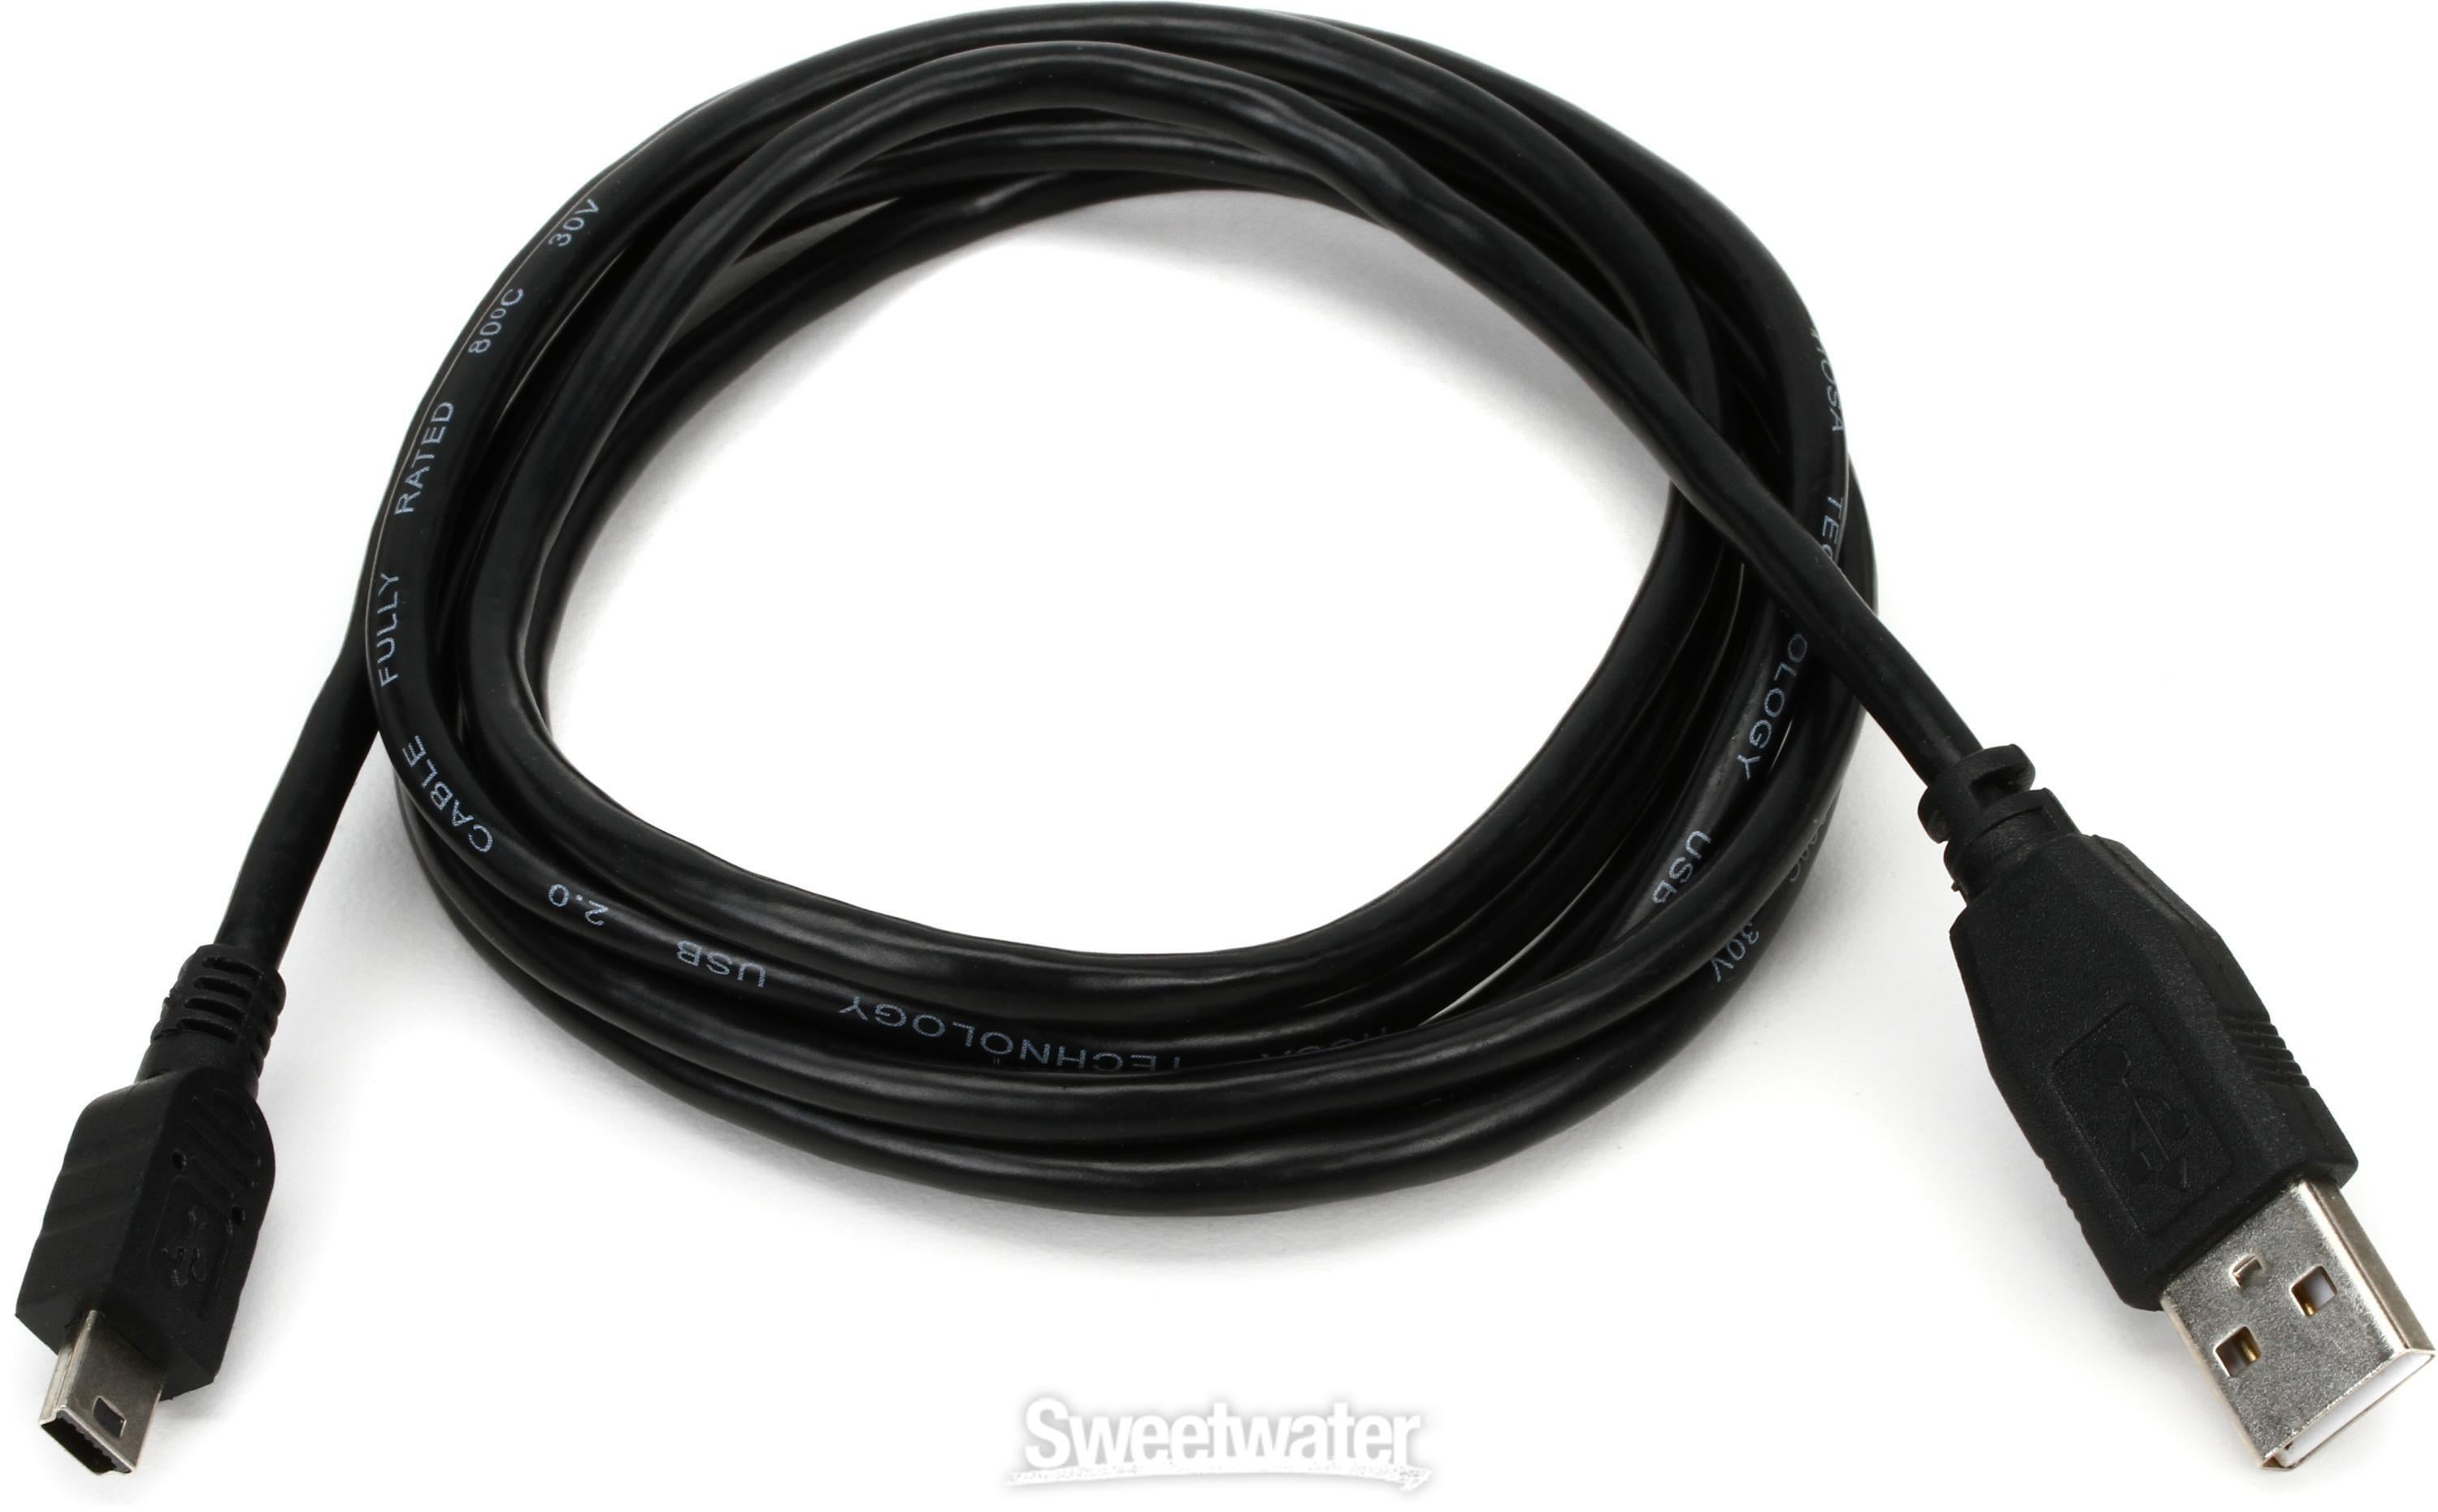 Hosa USB-206AM High-speed USB Type A to Mini-B Cable - 6 foot | Sweetwater